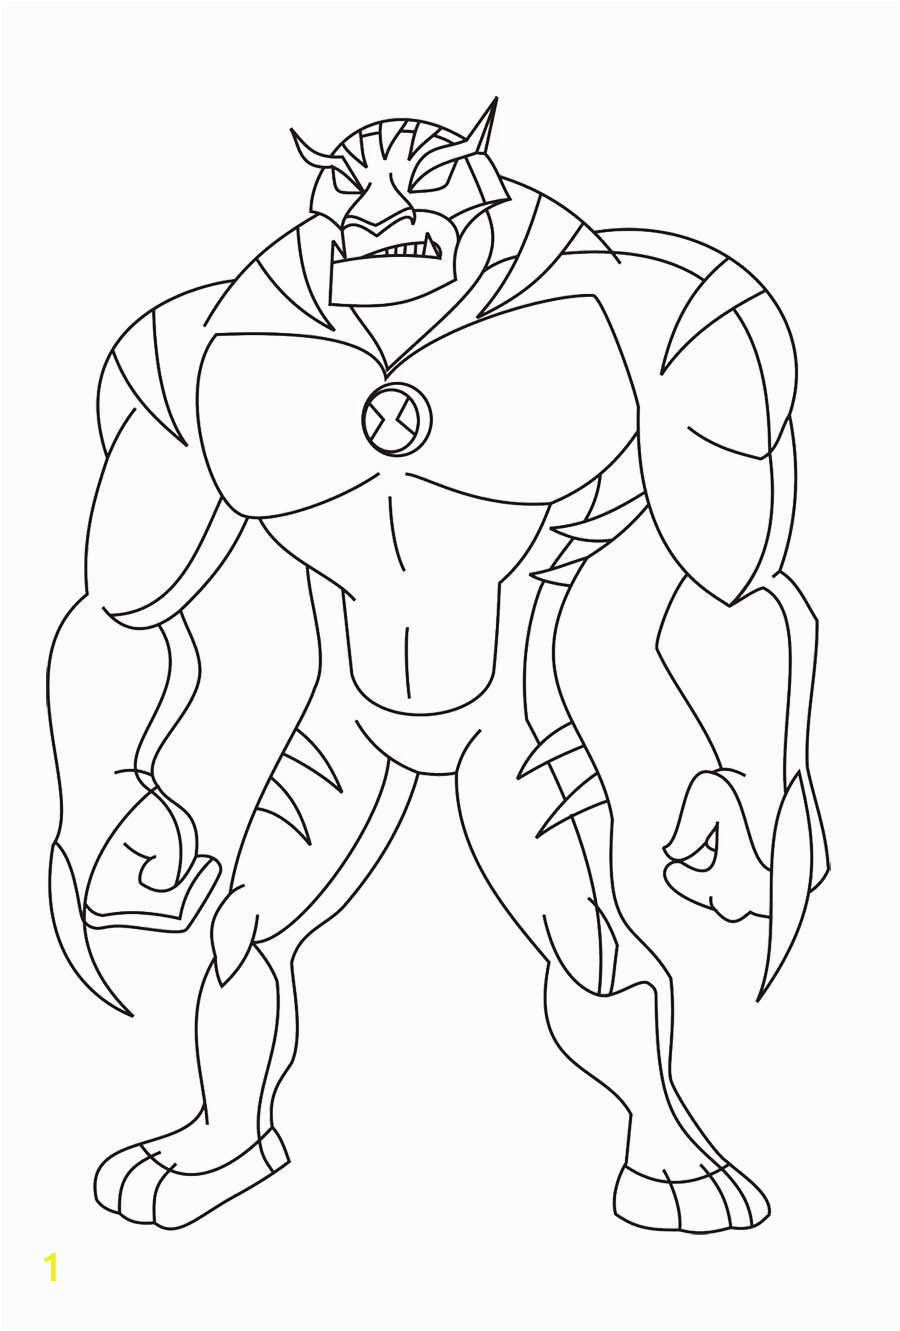 Ben 10 Omniverse Aliens Coloring Pages Coloring Page for Kids